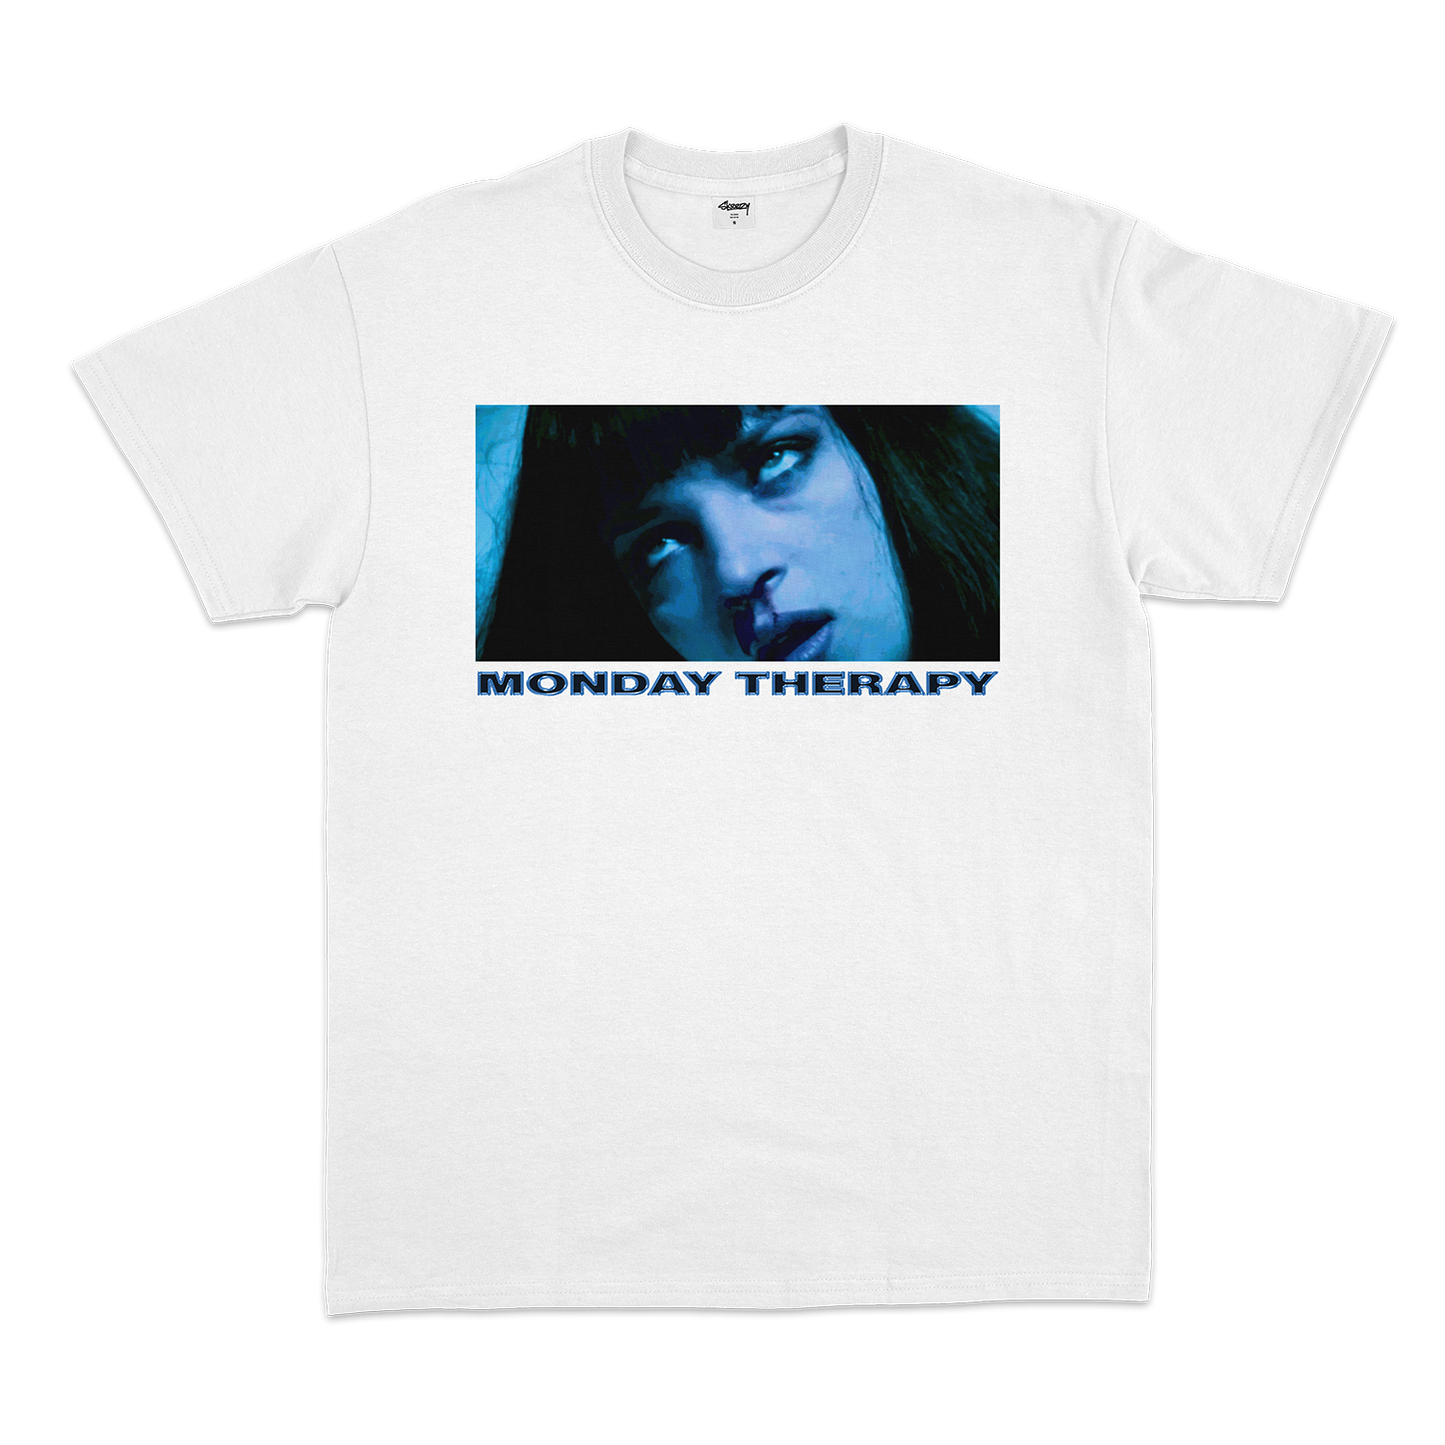 Monday Therapy tee